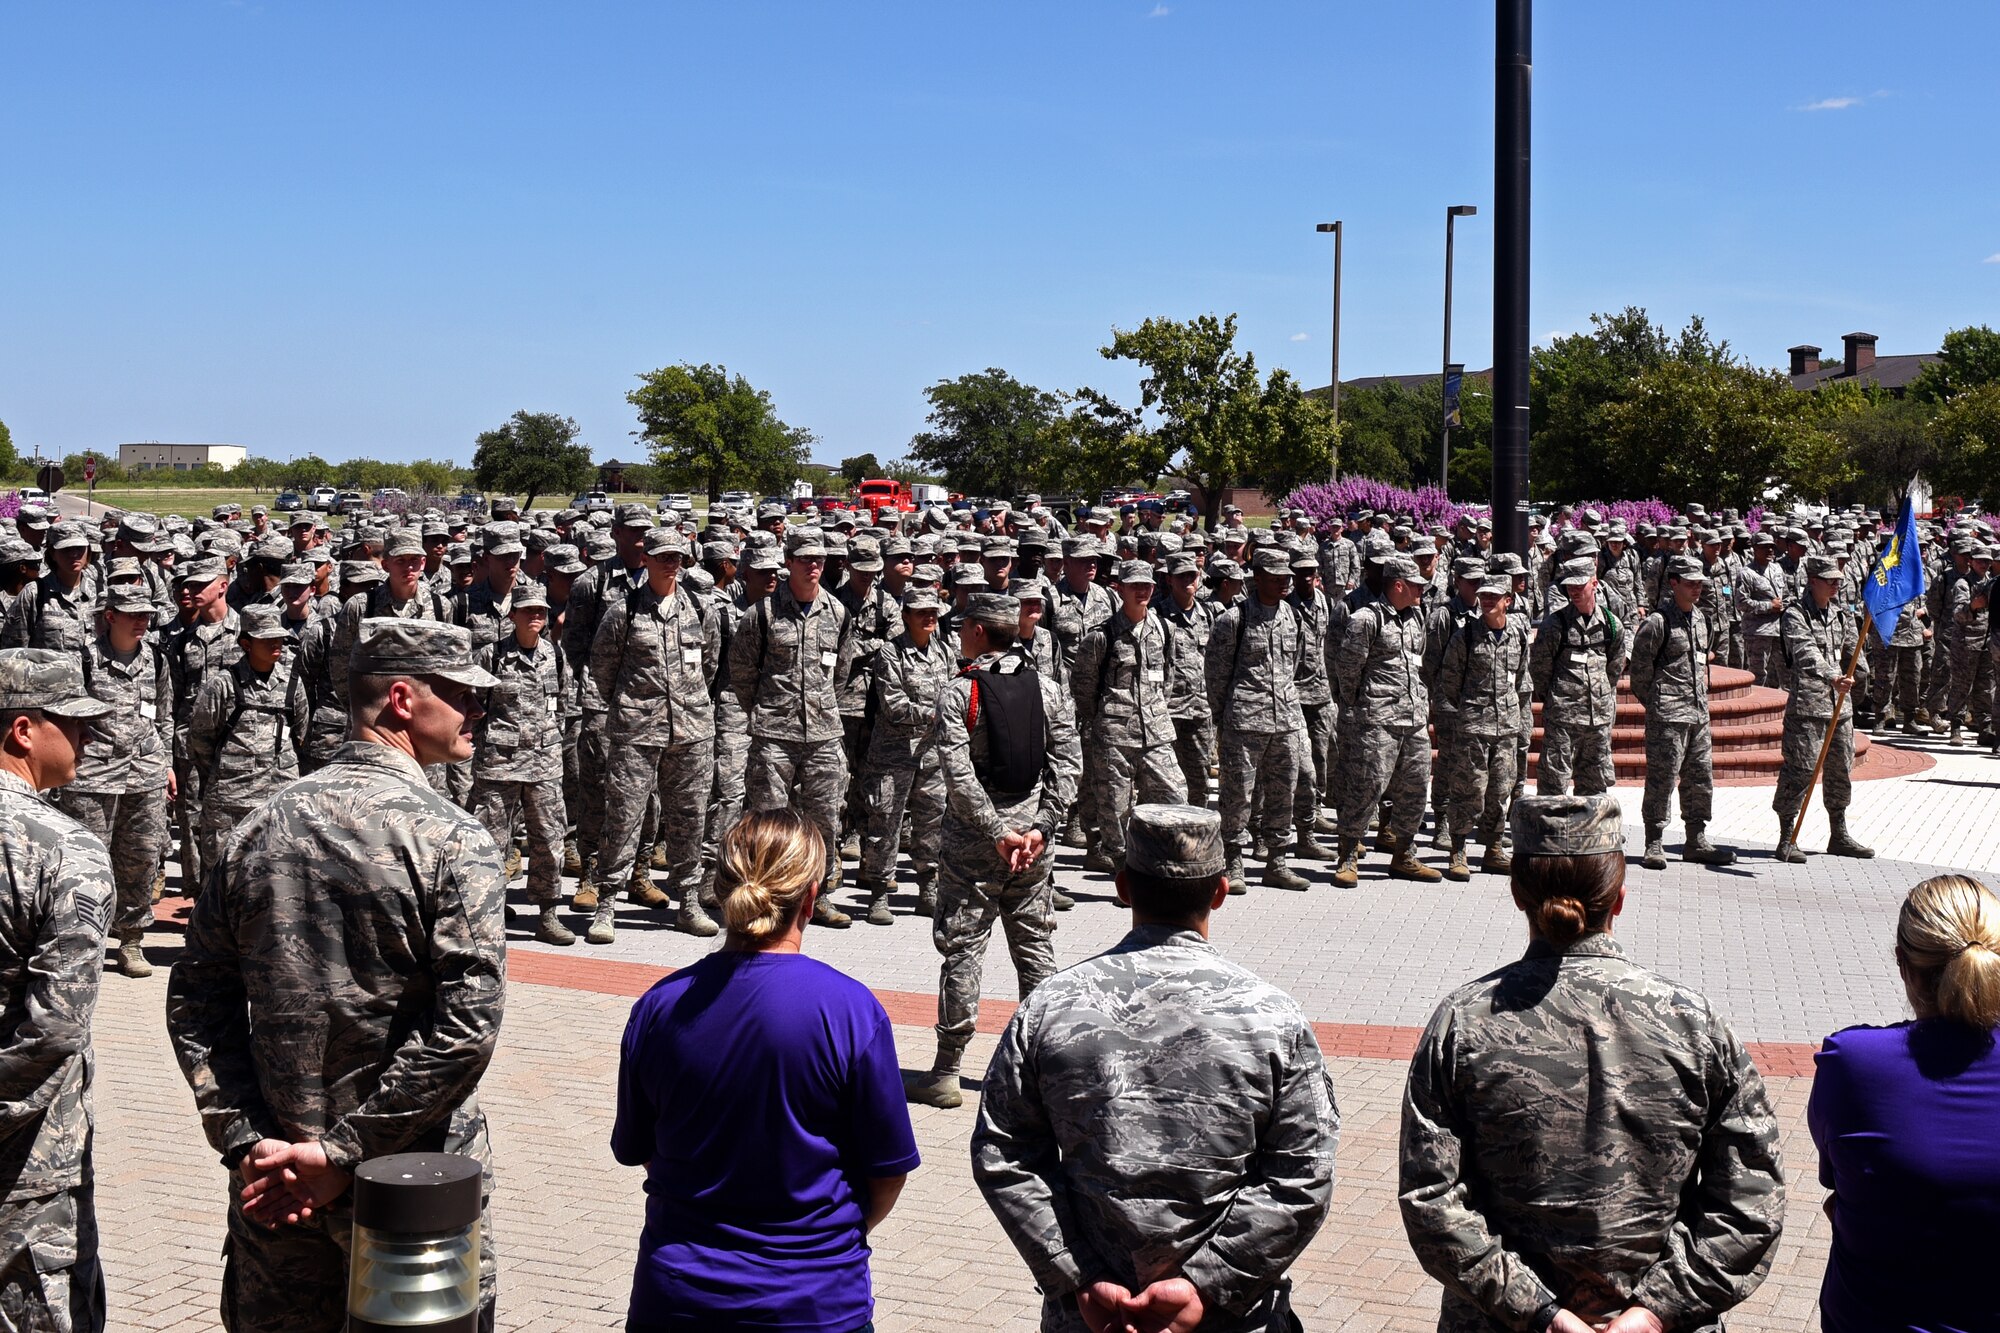 Goodfellow service members gather for a moment of silence and a group reciting of the Airman’s Creed in honor of U.S. Air Force Master Sgt. John Chapman at the Norma Brown building on Goodfellow Air Force Base, Texas, Aug. 24, 2018. Chief Master Sgt. Jason Funkhauser, 315th Training Squadron chief enlisted manager, spoke on the events that lead to Chapman receiving the Medal of Honor. (U.S. Air Force photo by Airman 1st Class Zachary Chapman/Released)